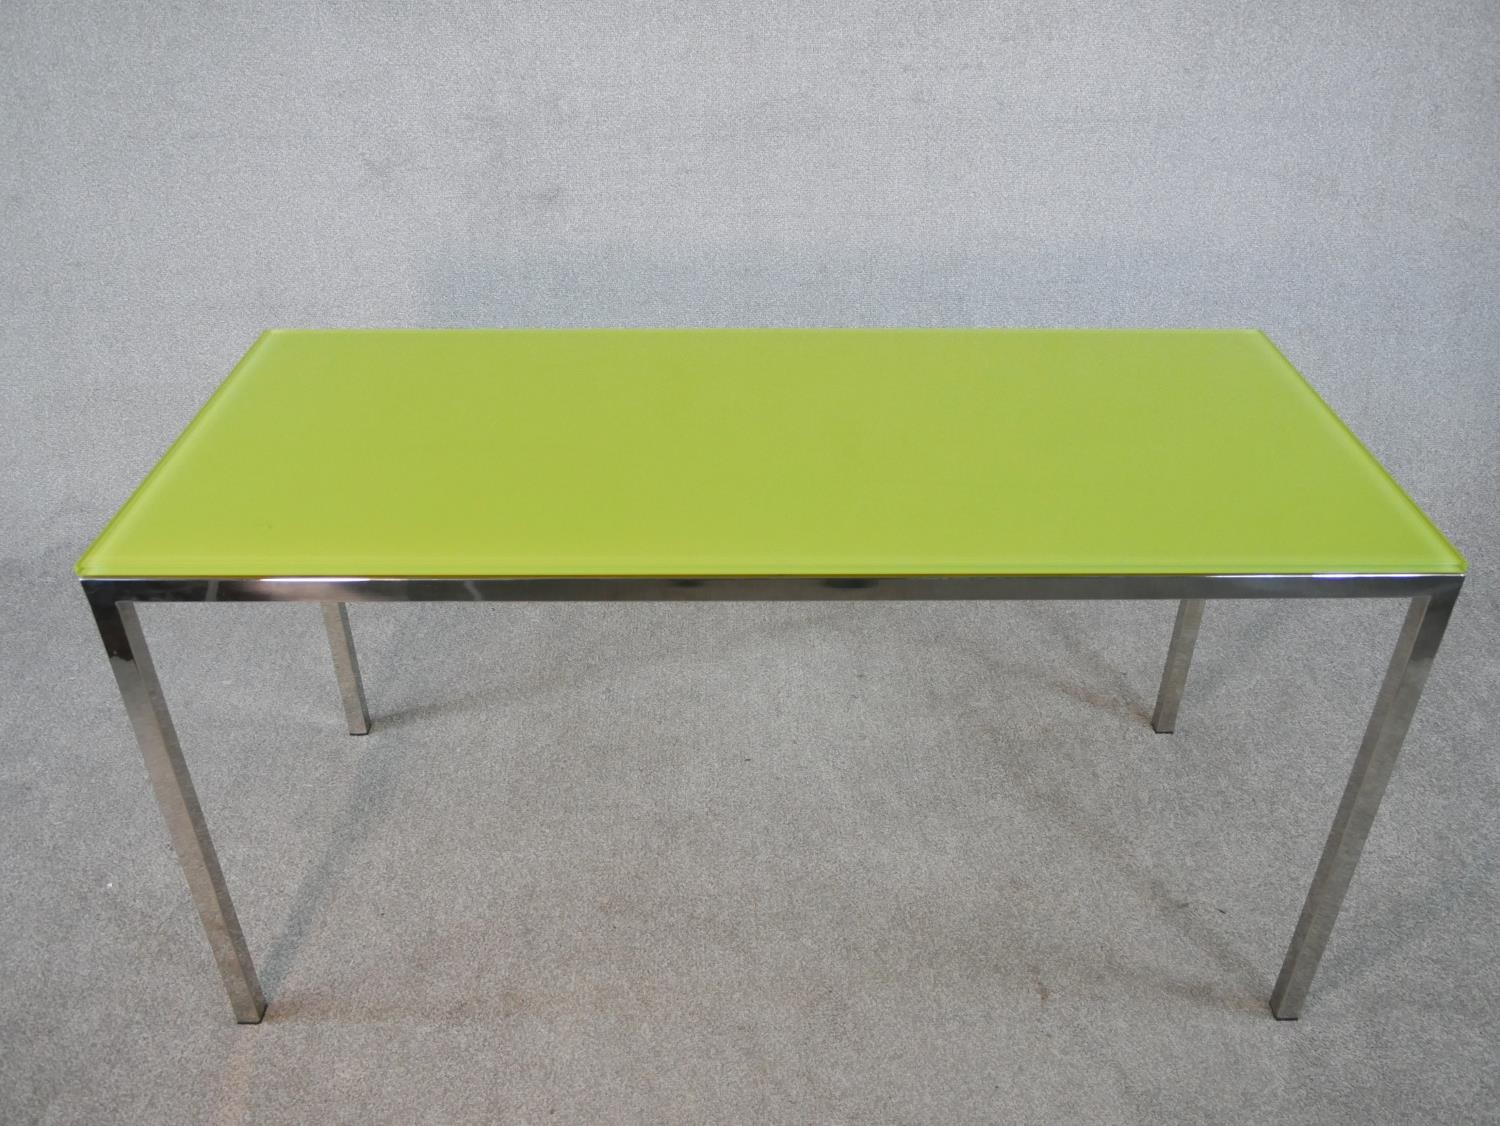 Driade ‘Jelly Slice’ Console Table by Philippe Starck, acid bathed painted chartreuses tempered - Image 2 of 4